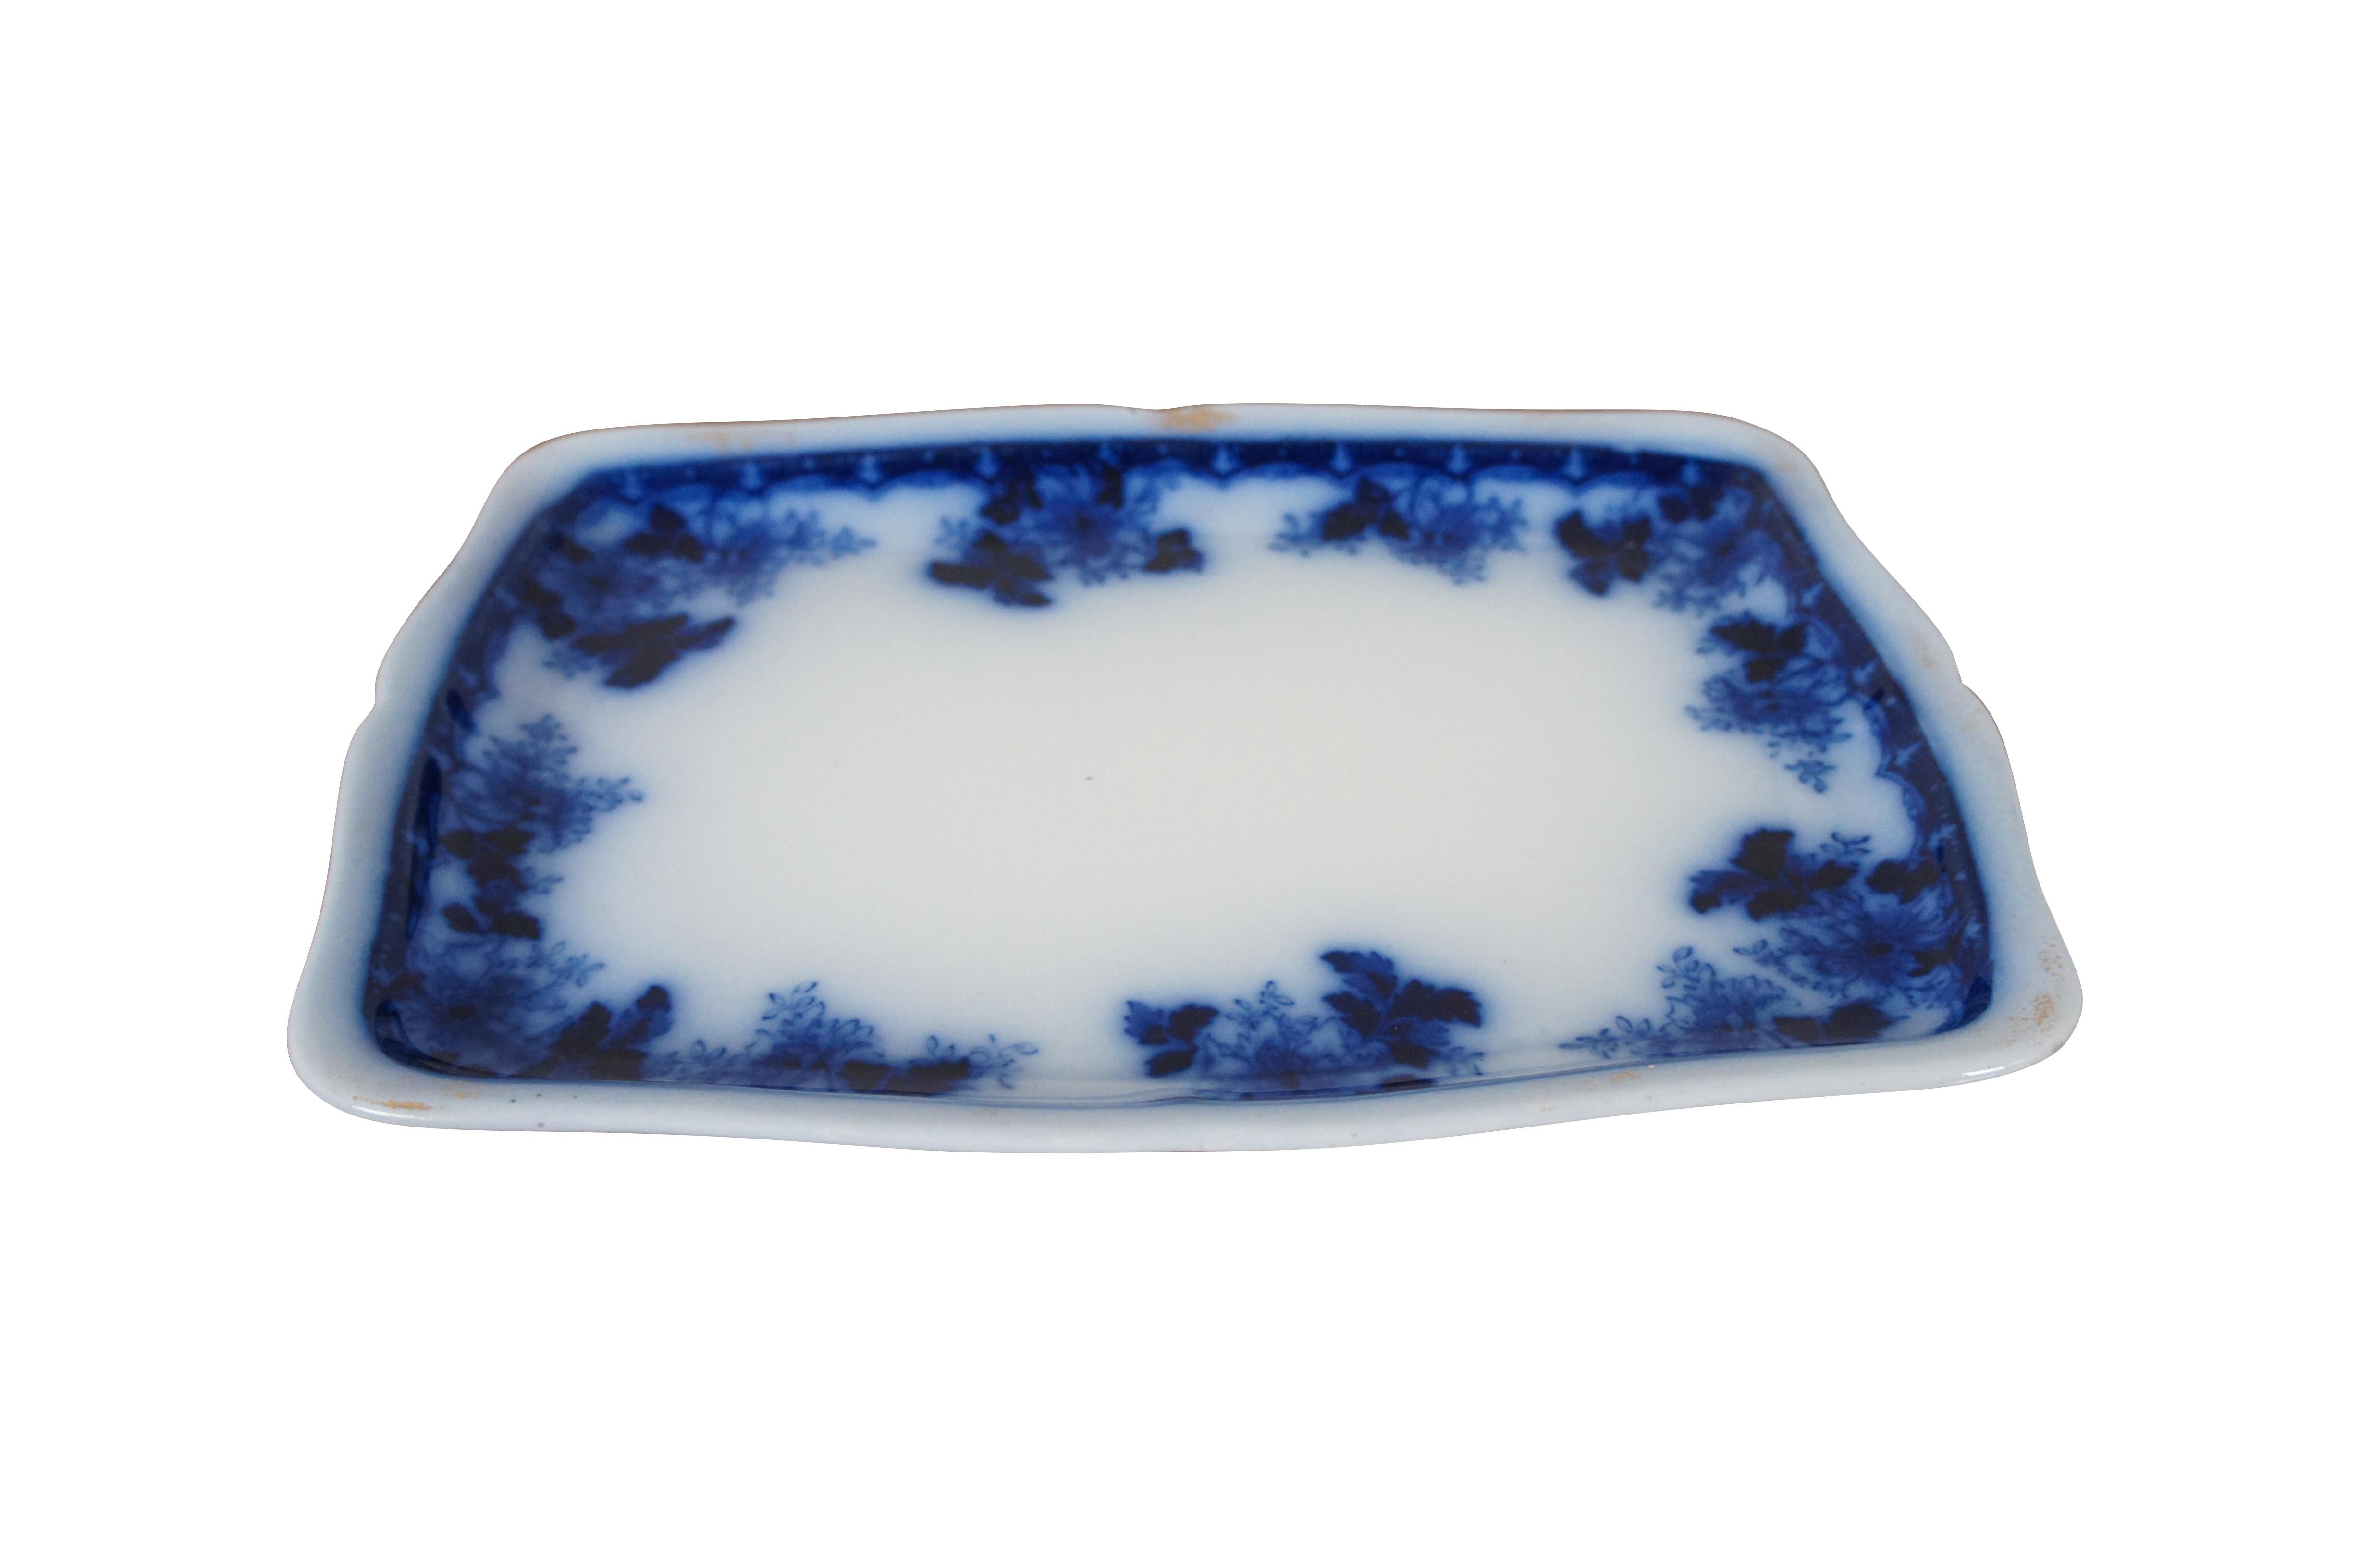 Antique flow blue semi-porcelain / semi viterous serving platter or tray by Mercer Pottery Company in the Luzerne pattern. Rectangular in form with slightly scalloped edges and a border design of leaves and flowers. Edges were originally